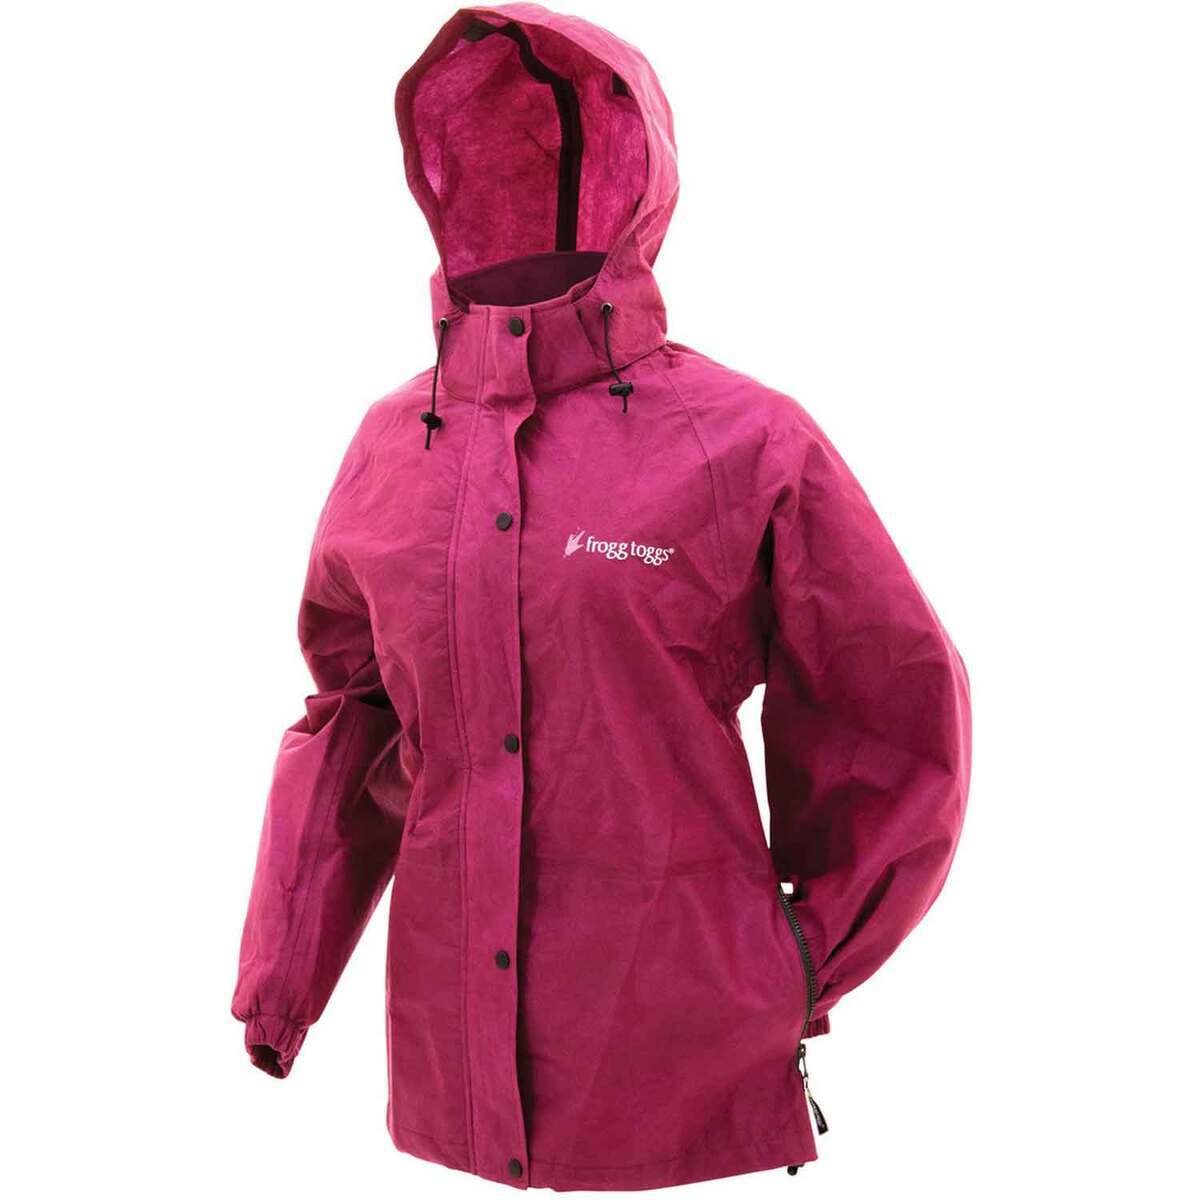 Frogg Toggs Women's Pro Action Jacket - Cherry